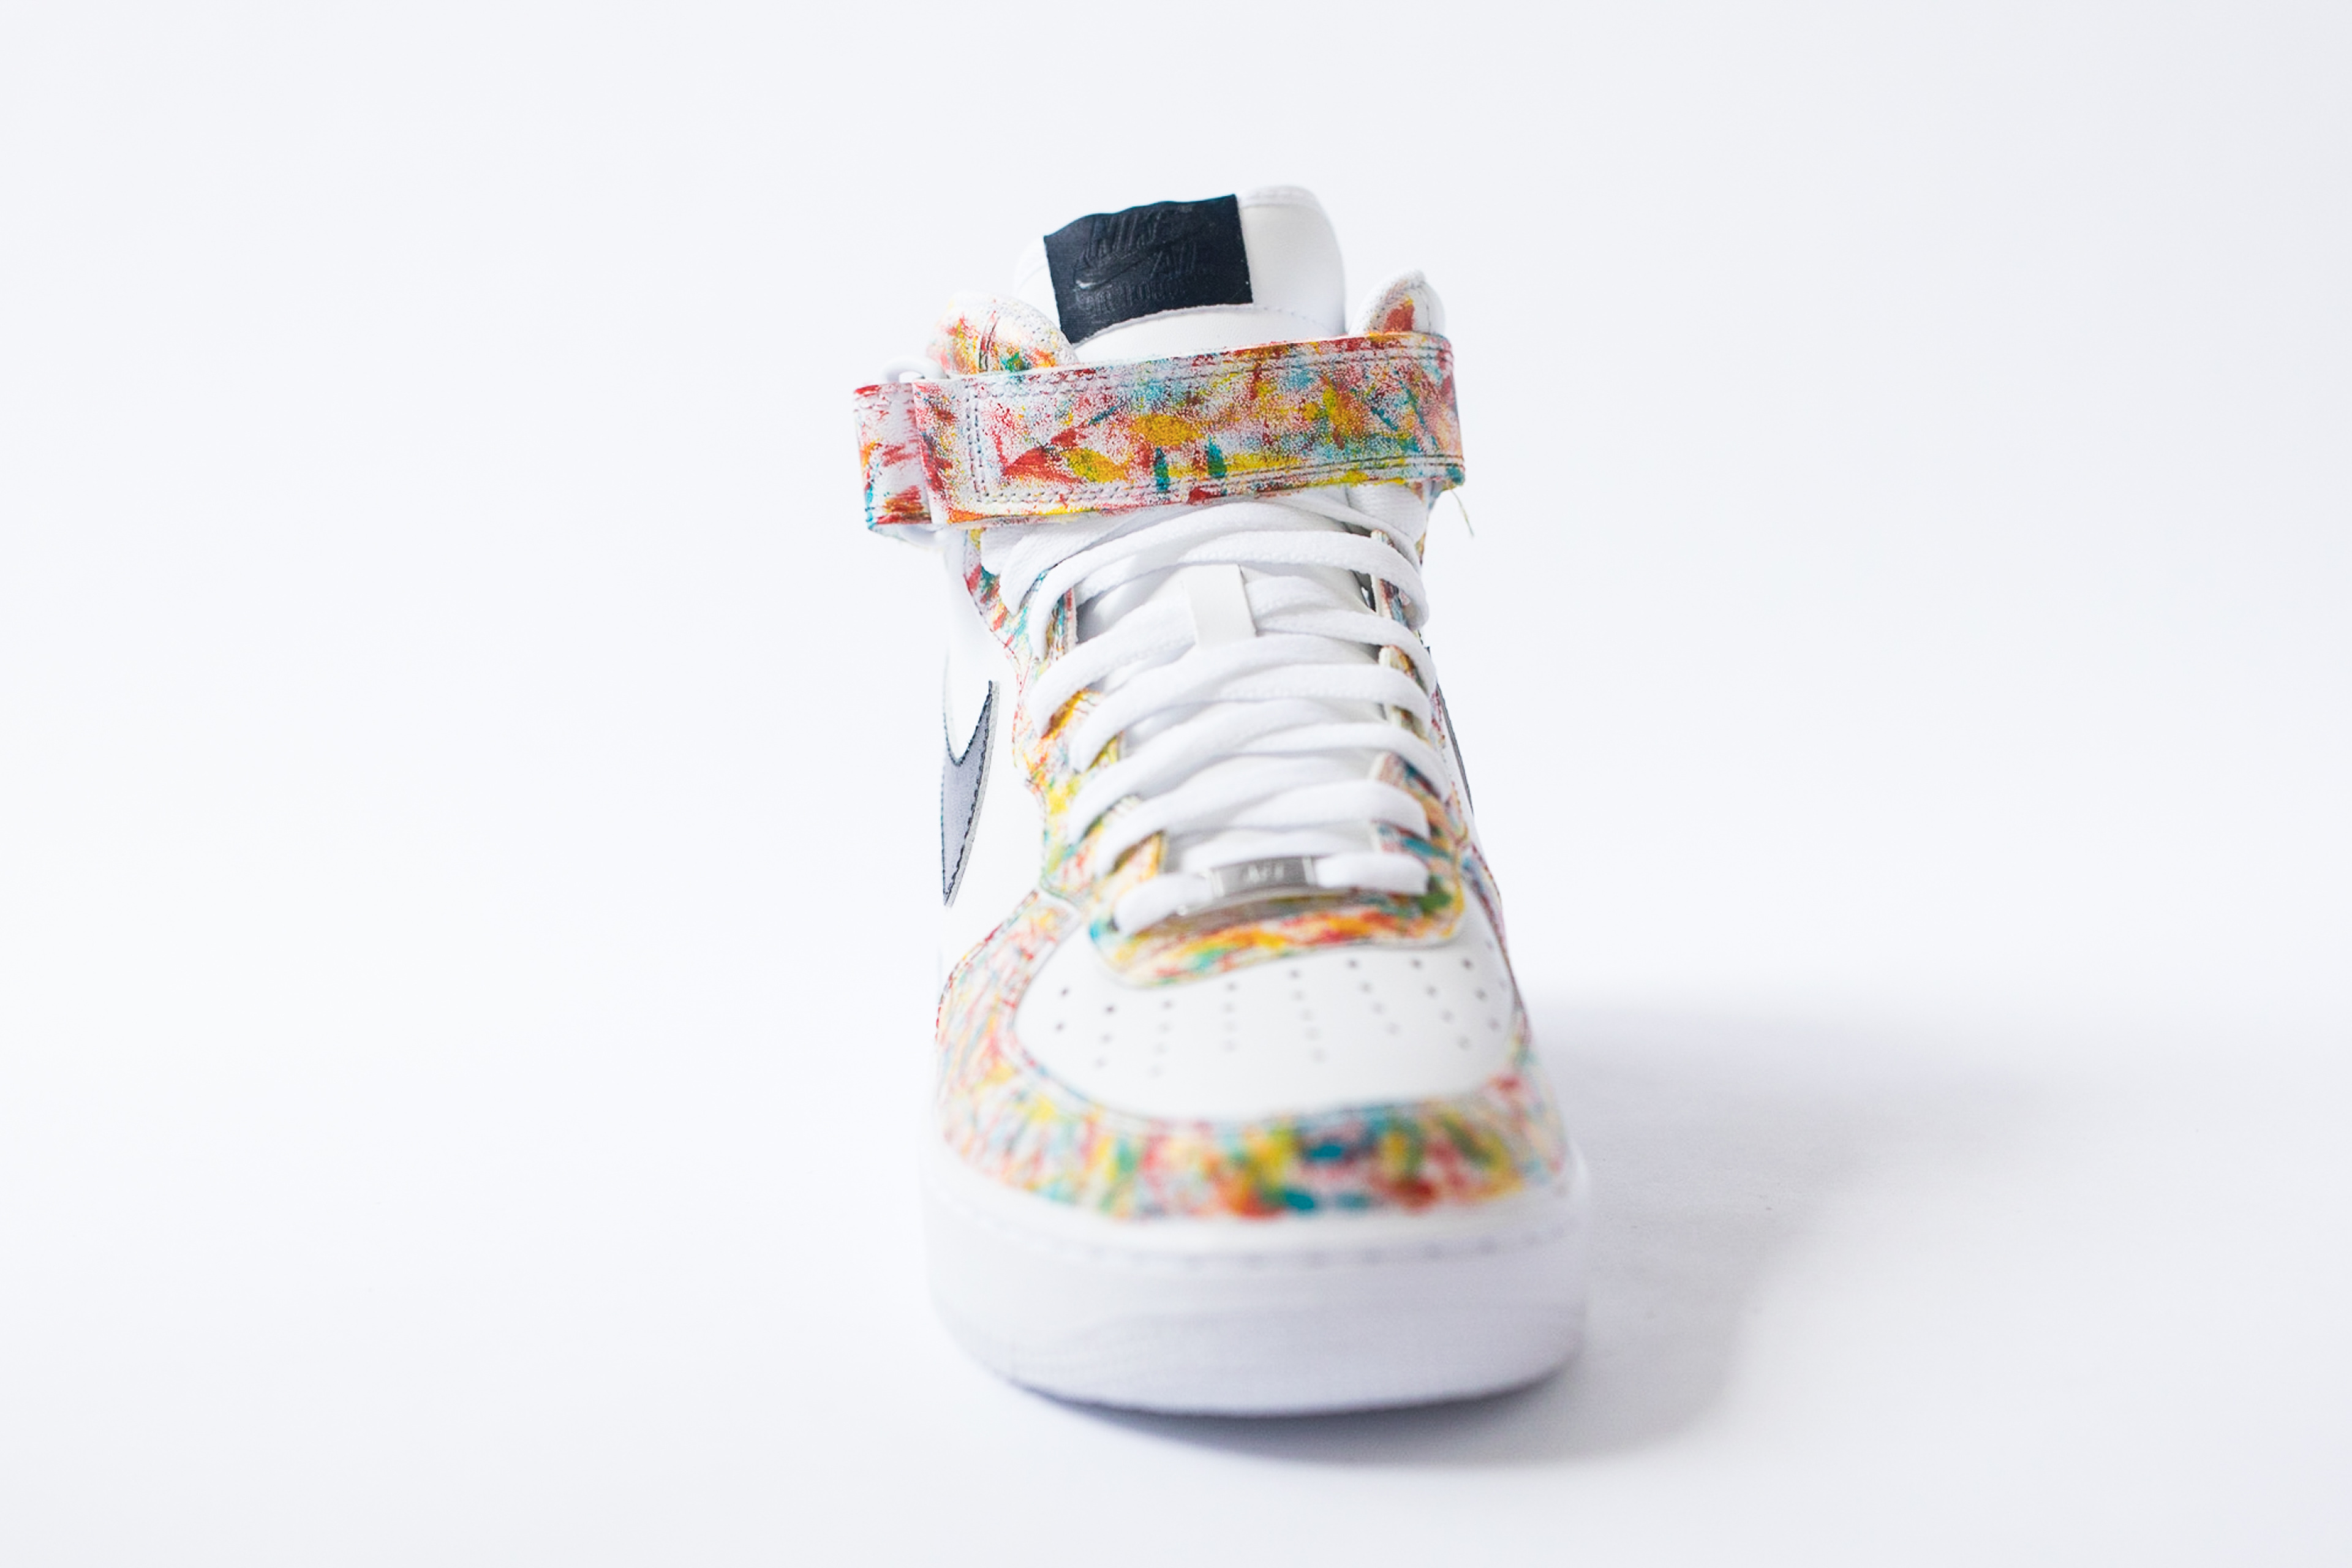 air force 1 fruity pebbles